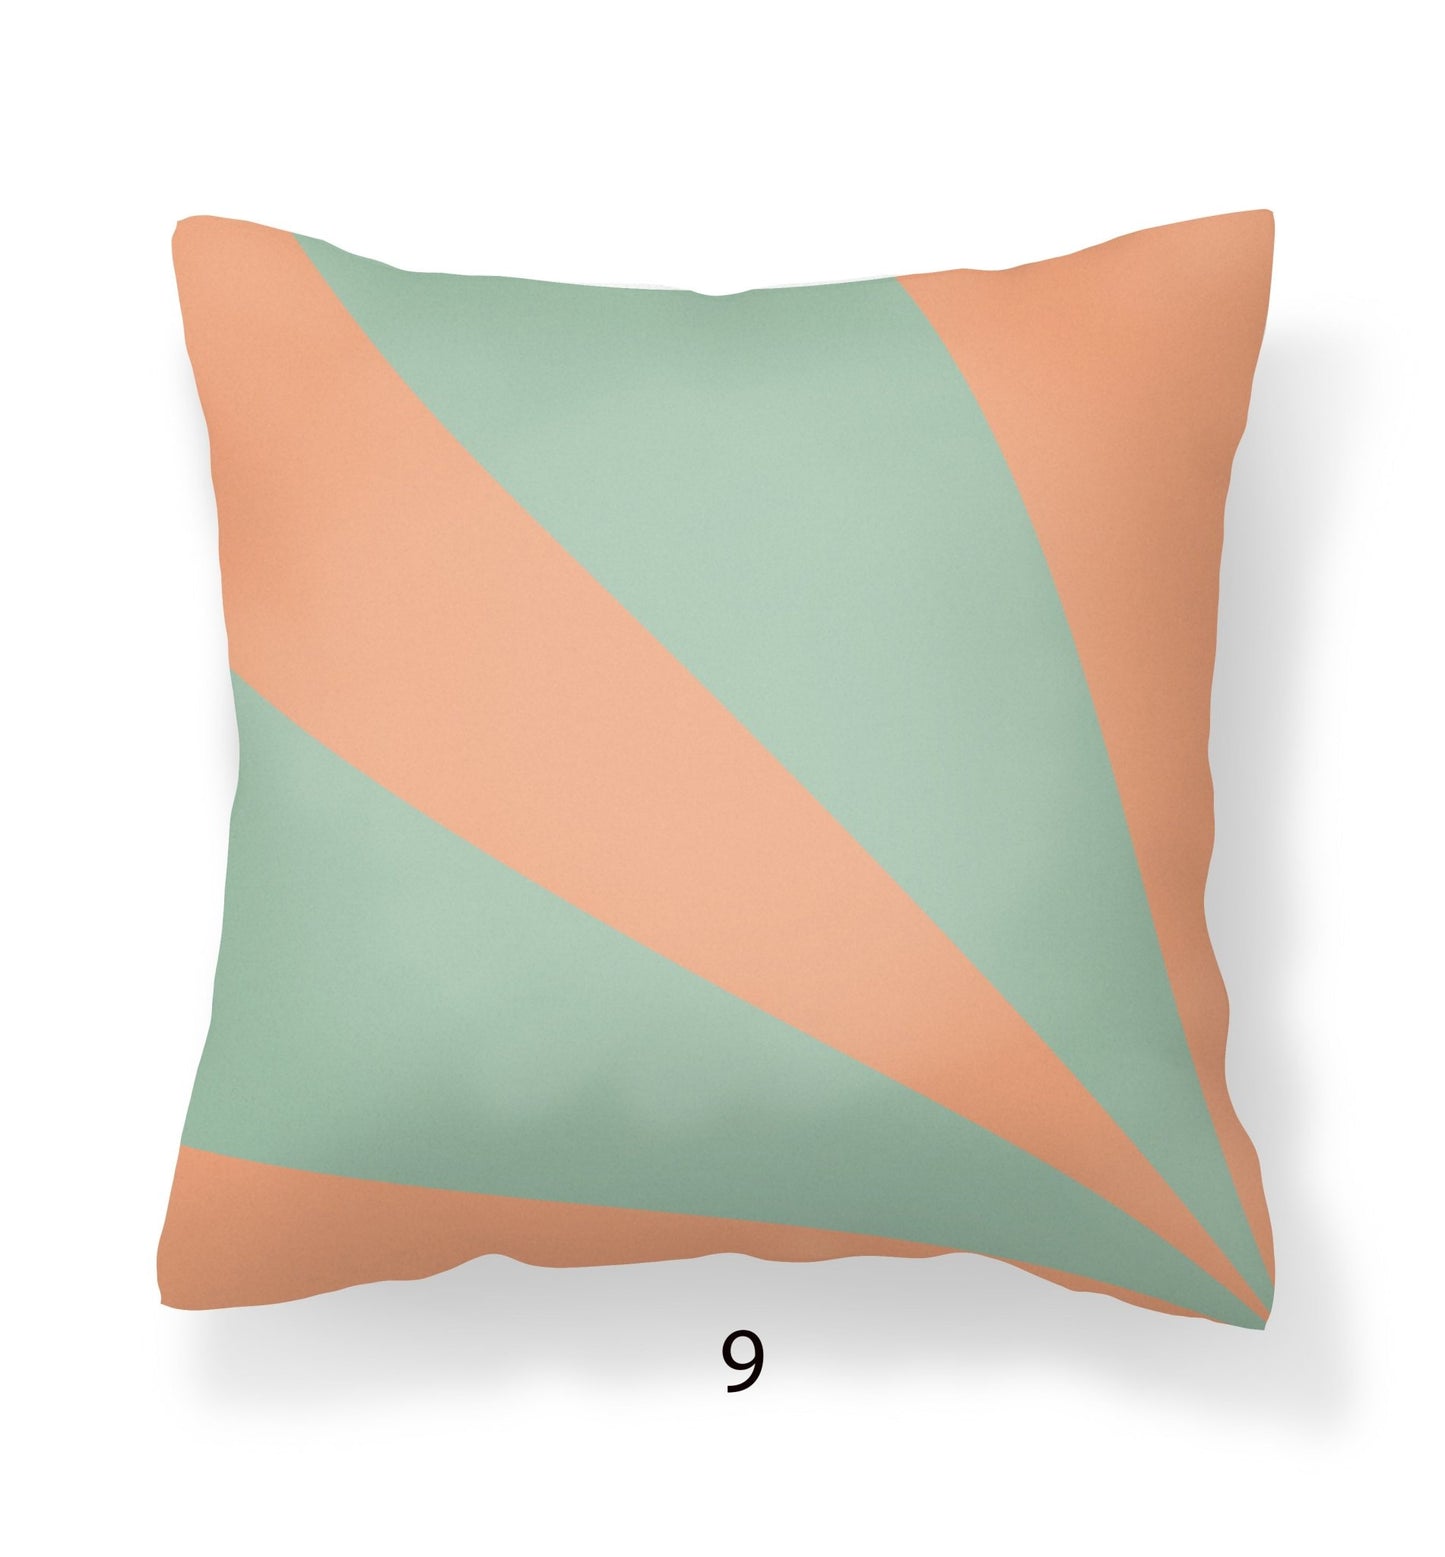 Peach Pillow Covers - Mint Green and Peach Mix and Match Pillow Cases